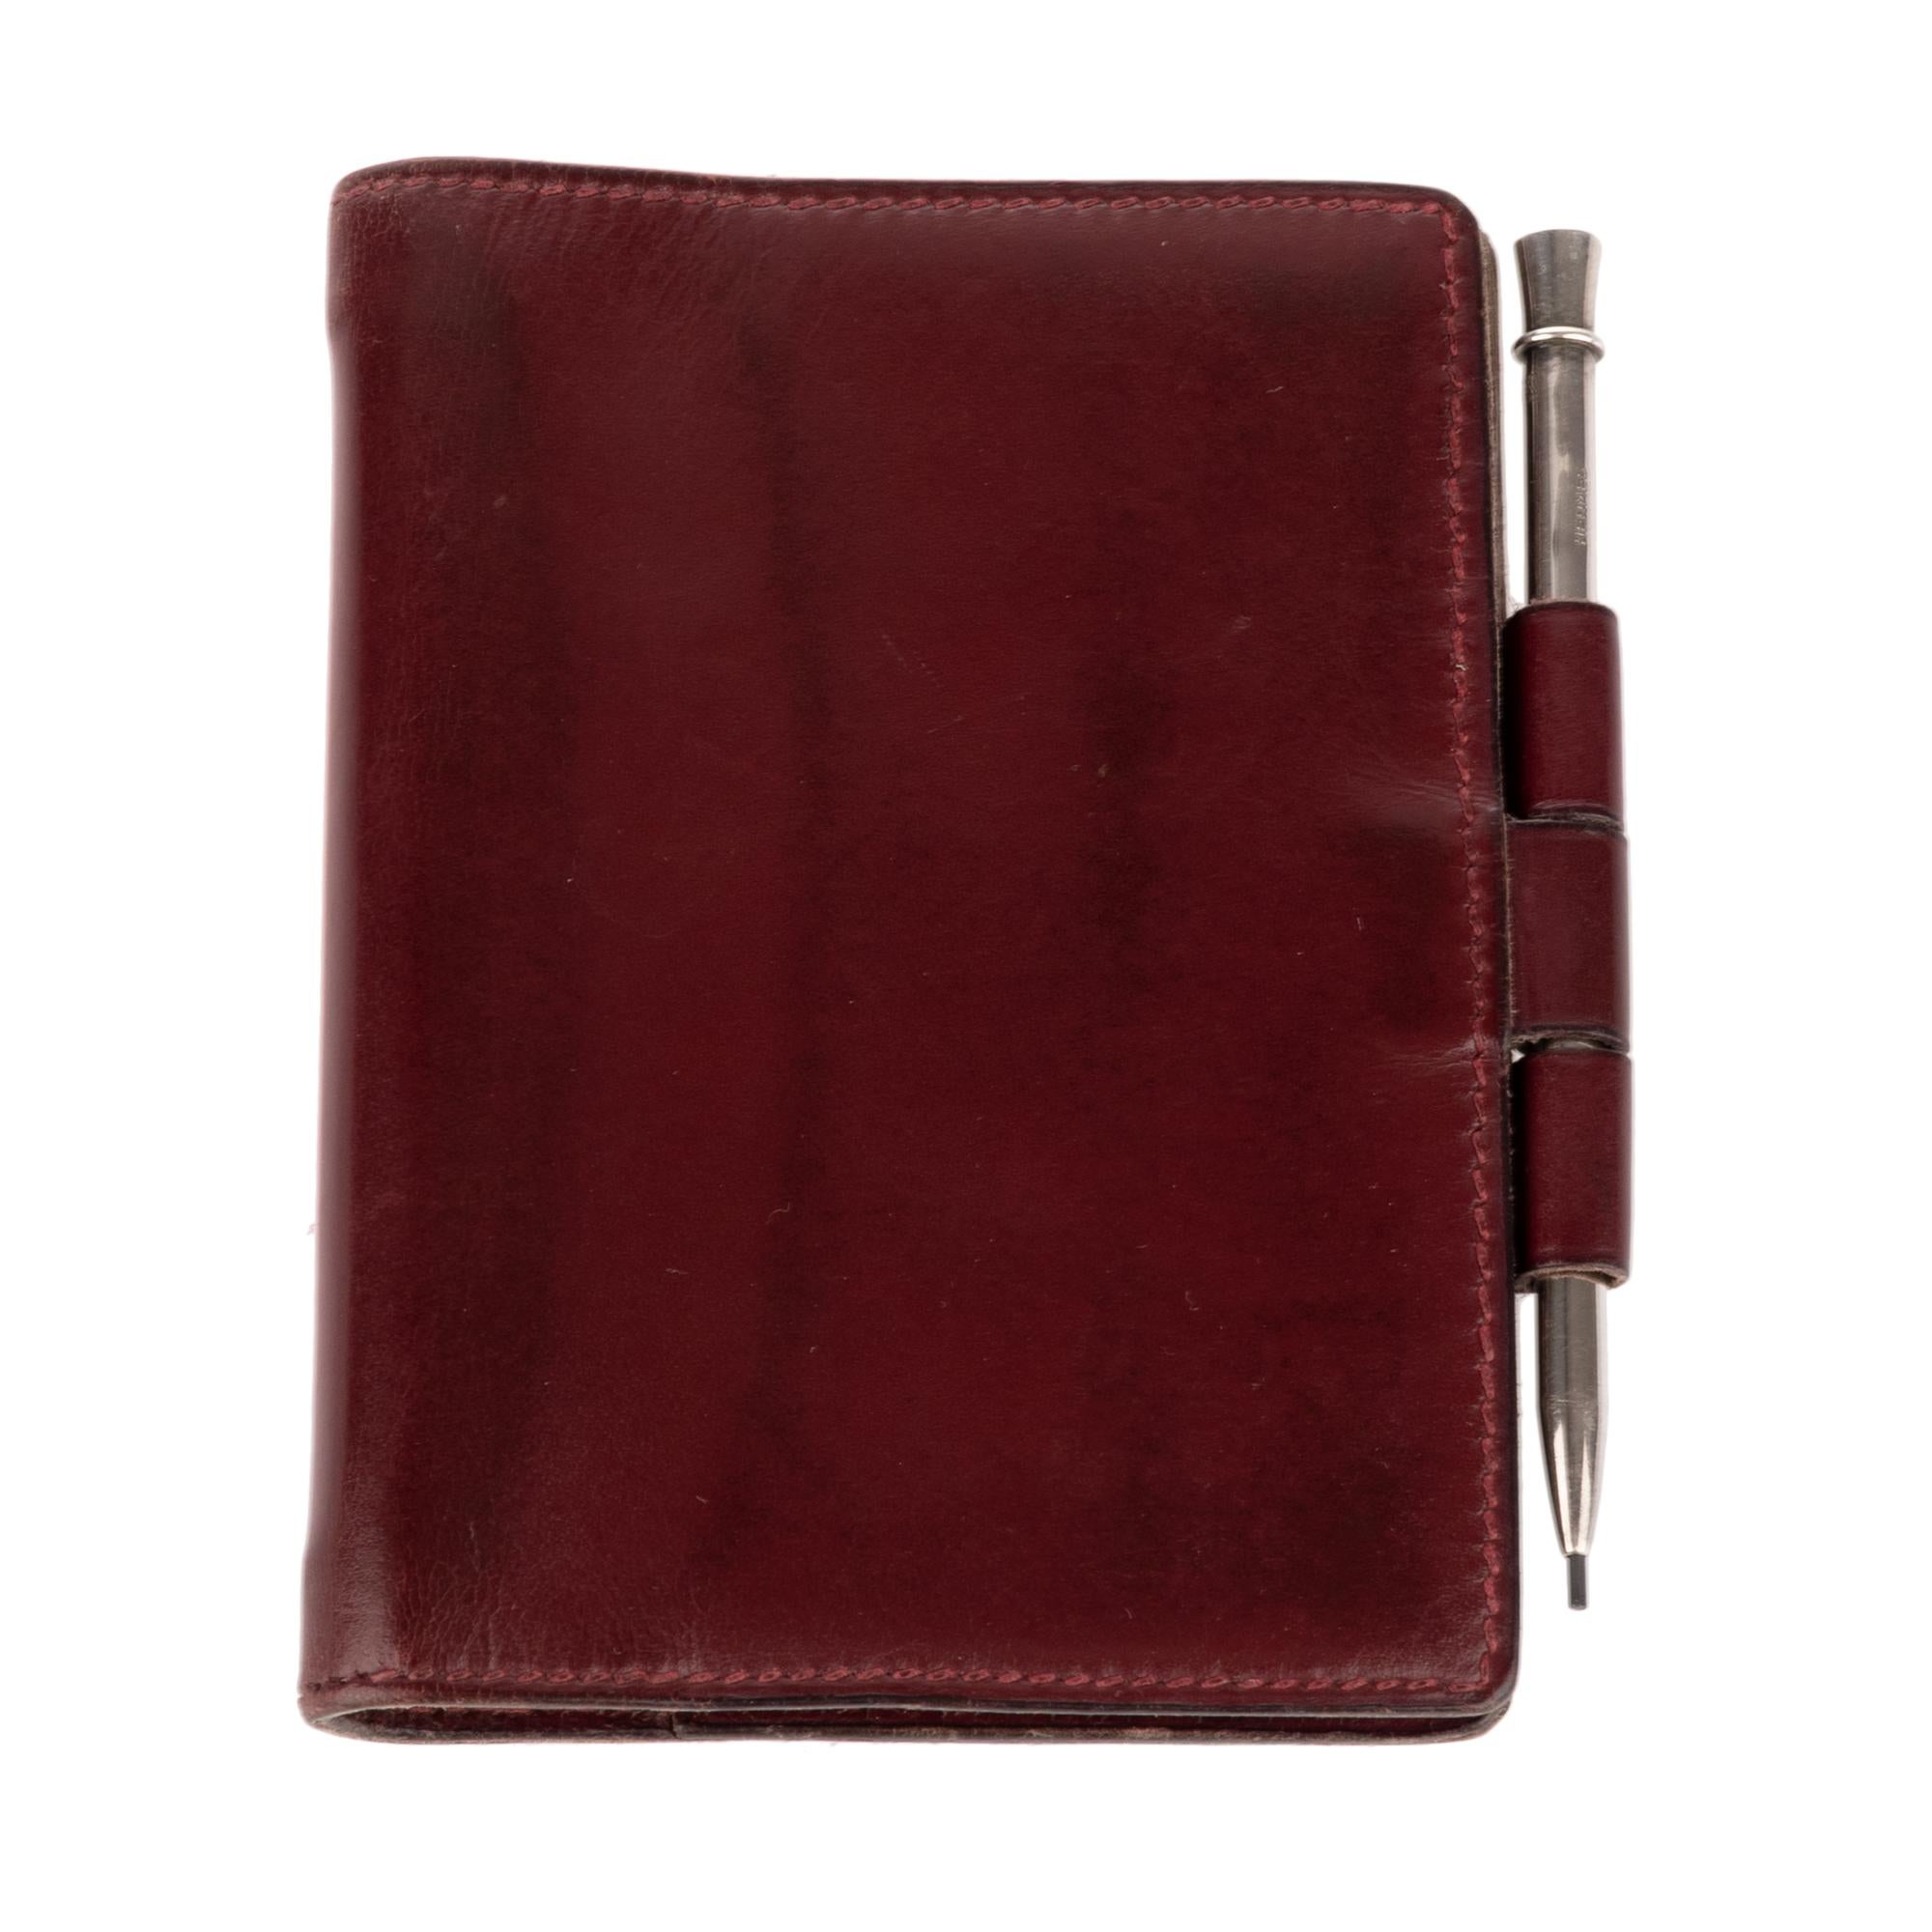 Agenda Hermès Small model in calf burgundy leather , 1 note block pin or calendar or repertoire, 1 original silver metal pen.
Format (exterior) width 8.5 cm x height 10 cm.
Open: 17 cm
Good vintage condition with some light marks of use.
Sold with